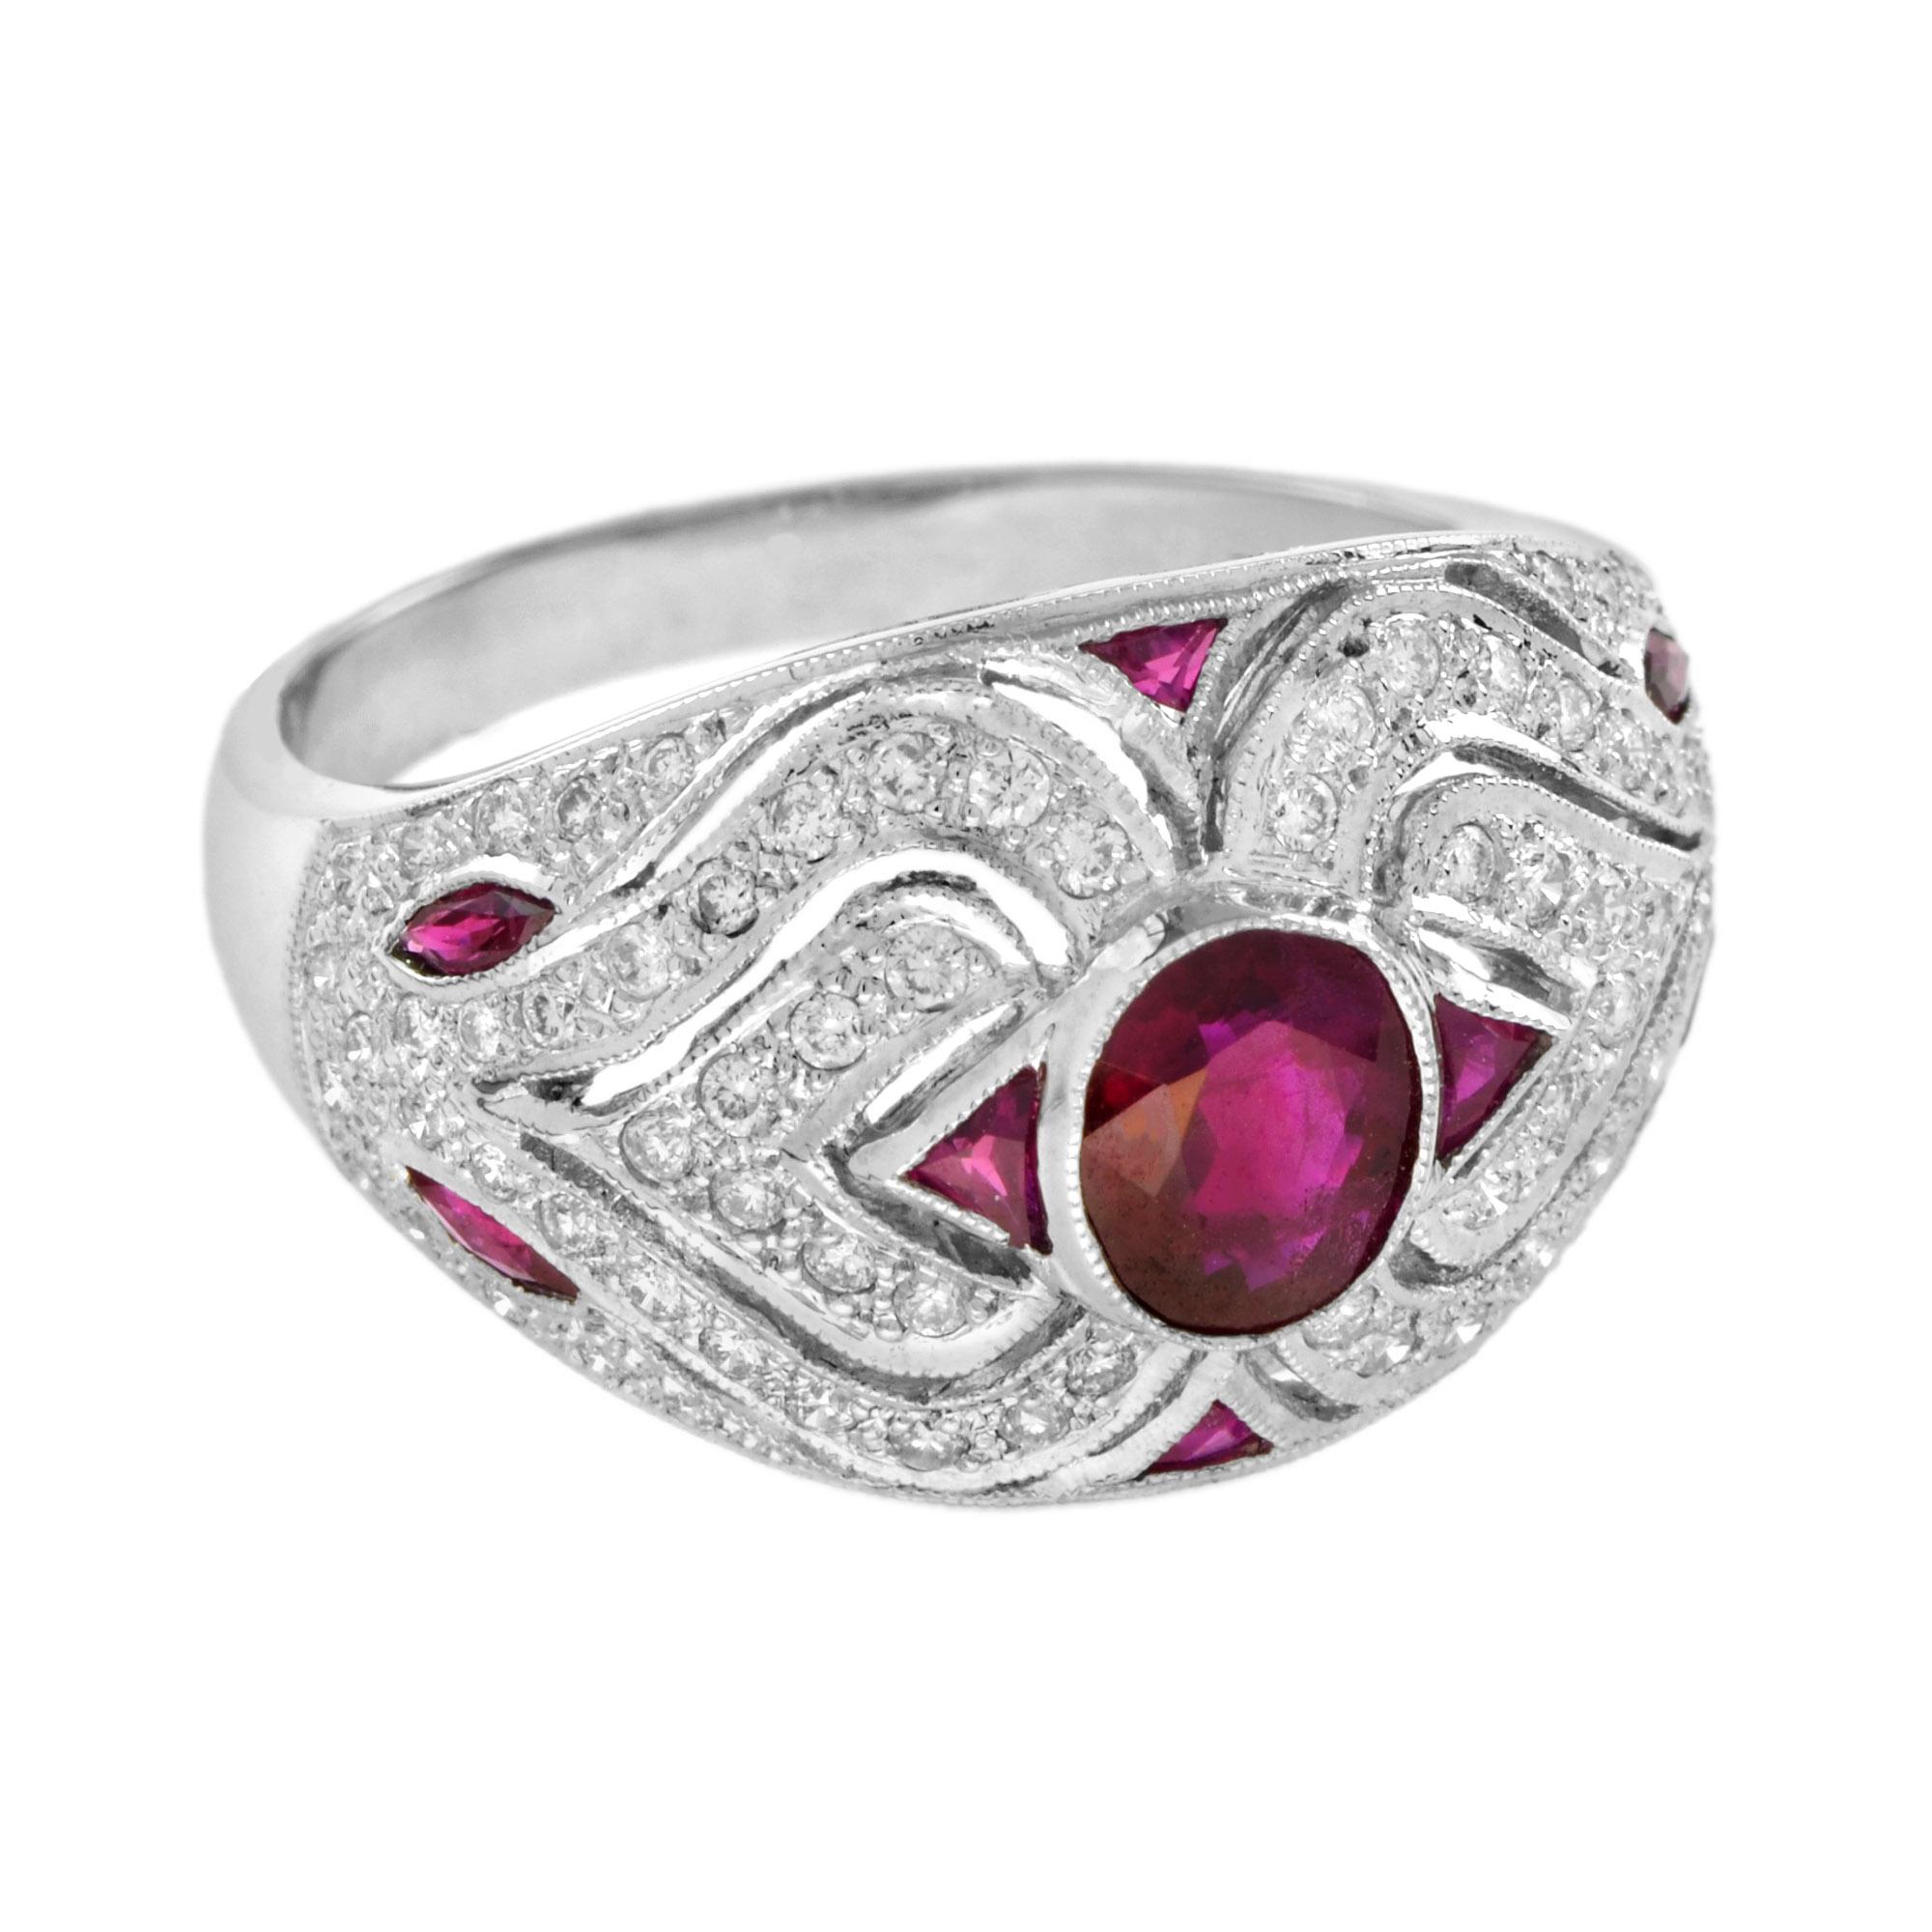 A bold ruby and diamond vintage inspired ring as it could be worn as a right hand ring or as engagement ring. Centering an oval cut ruby weighting 0.65 carat. The setting is made of solid 18k white gold and every surface has been intricately